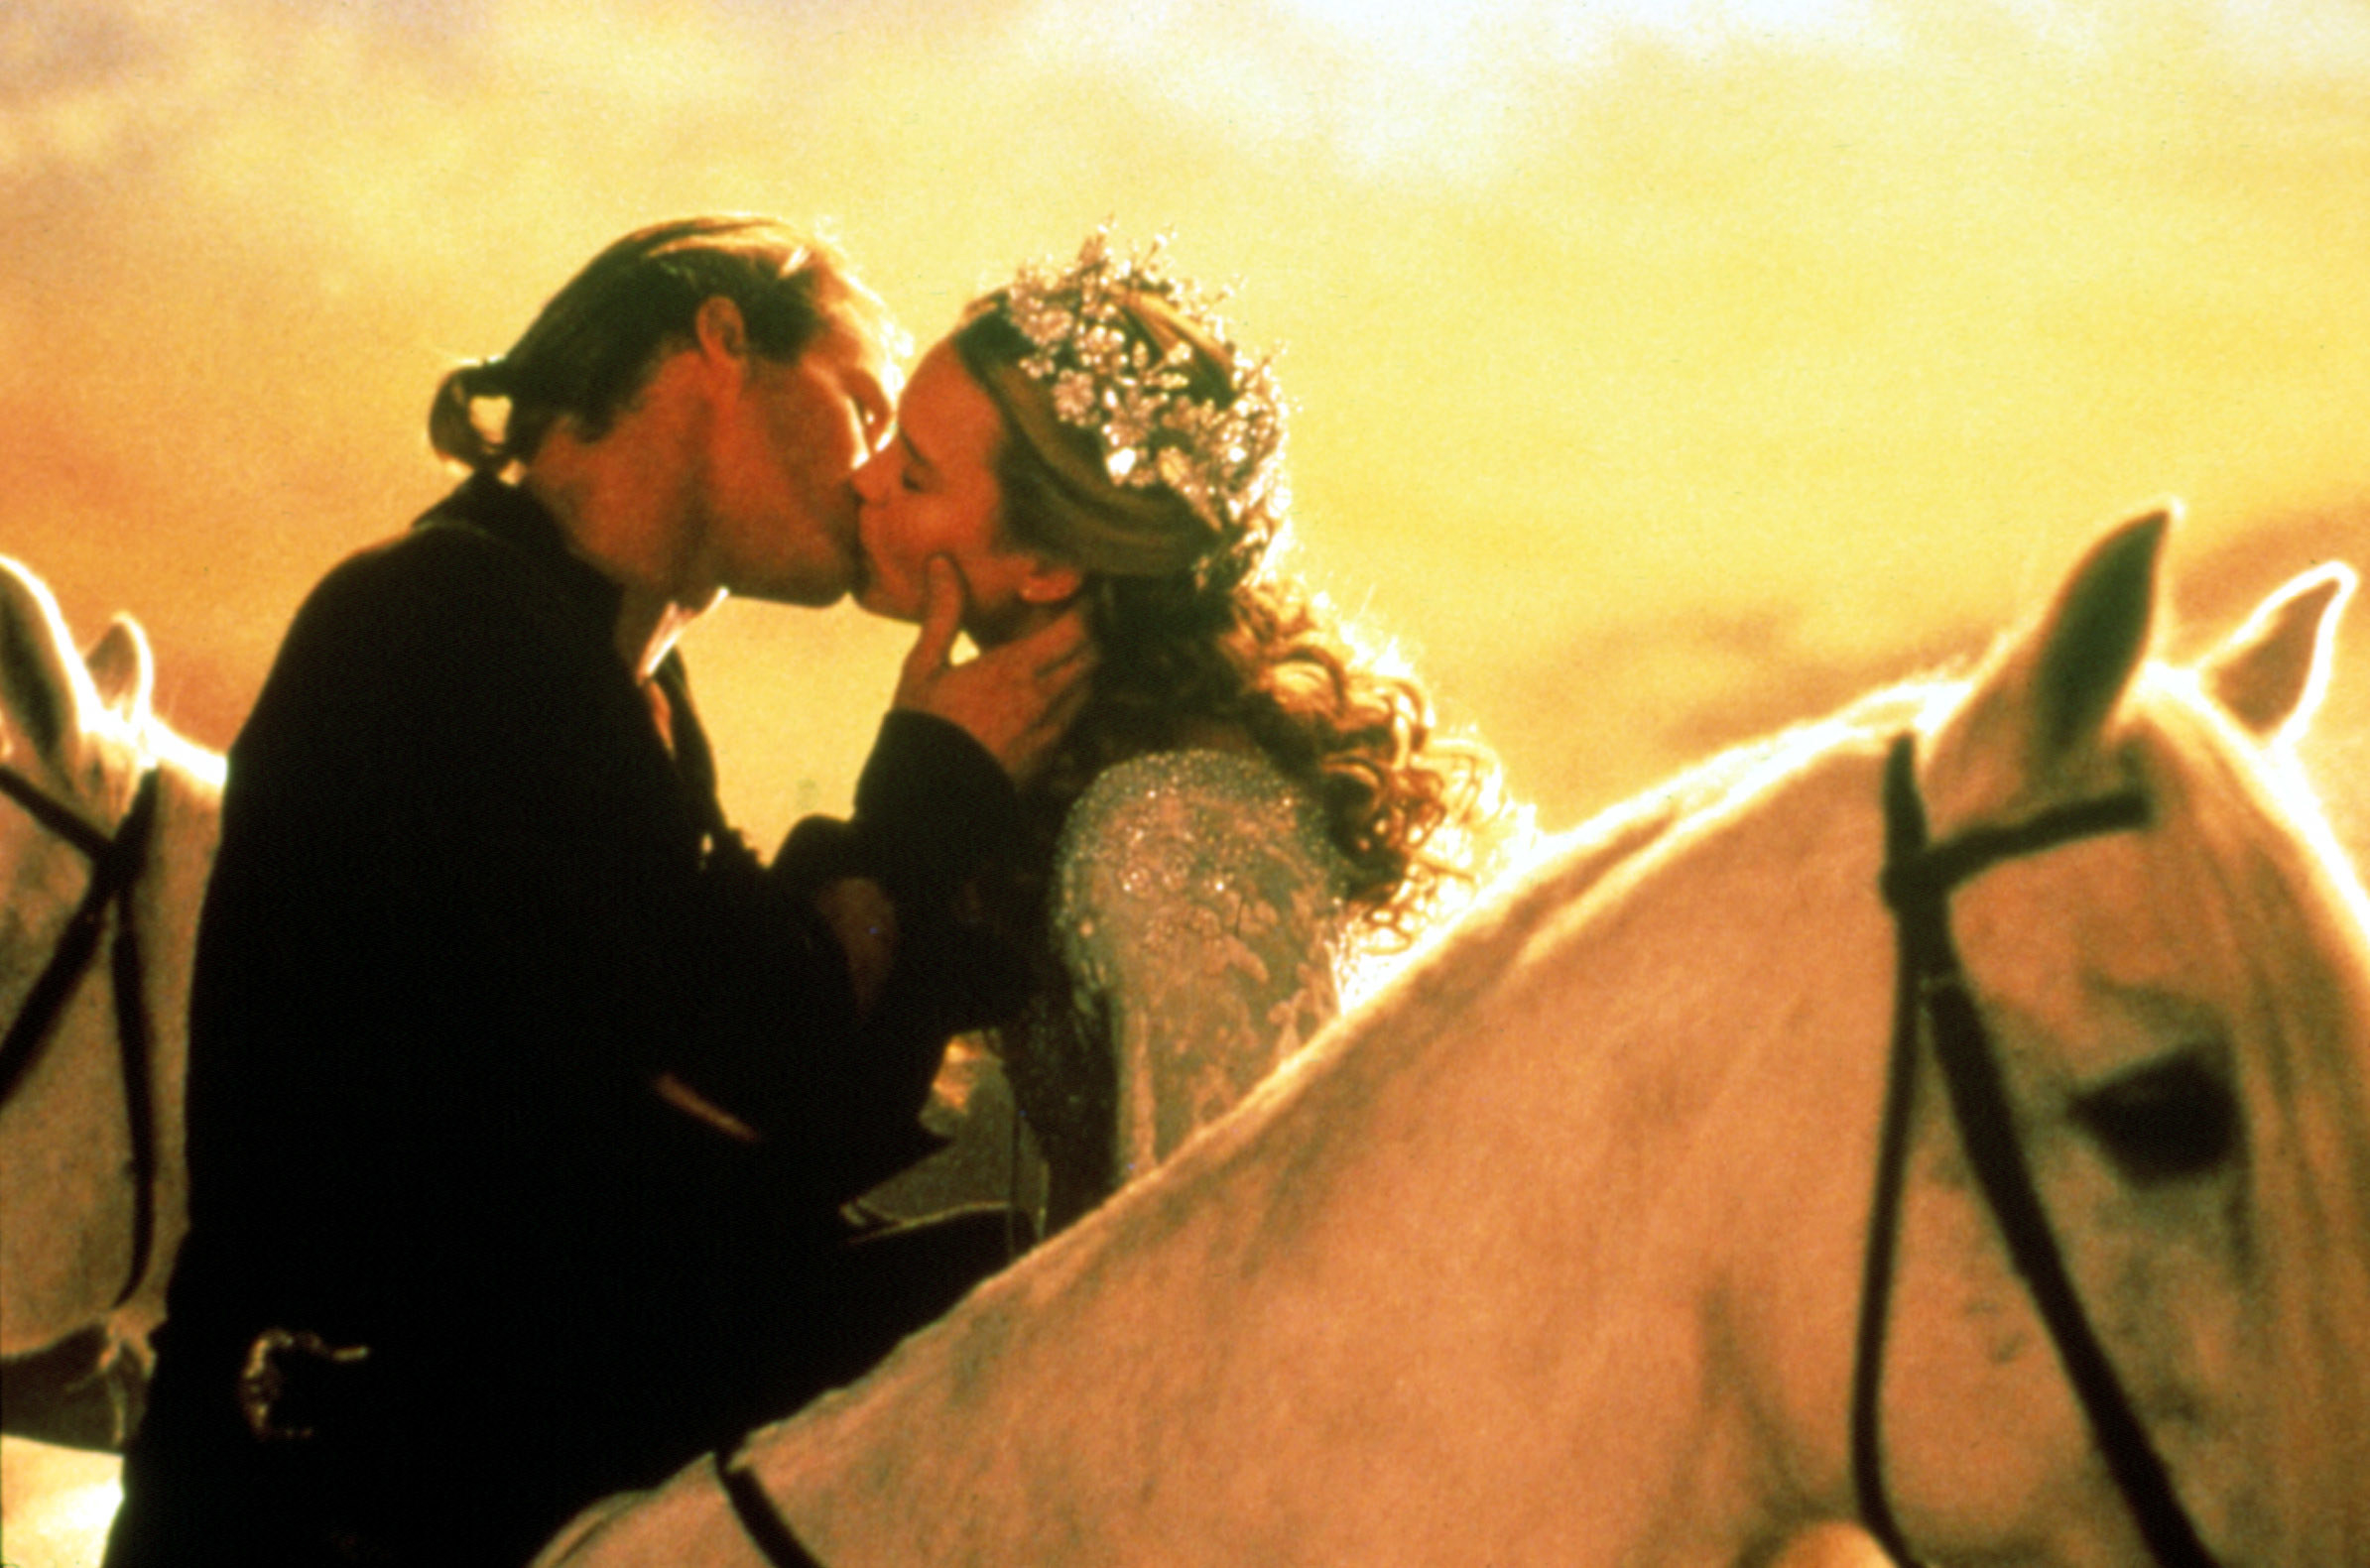 the couple kissing as they sit horseback on their own horses